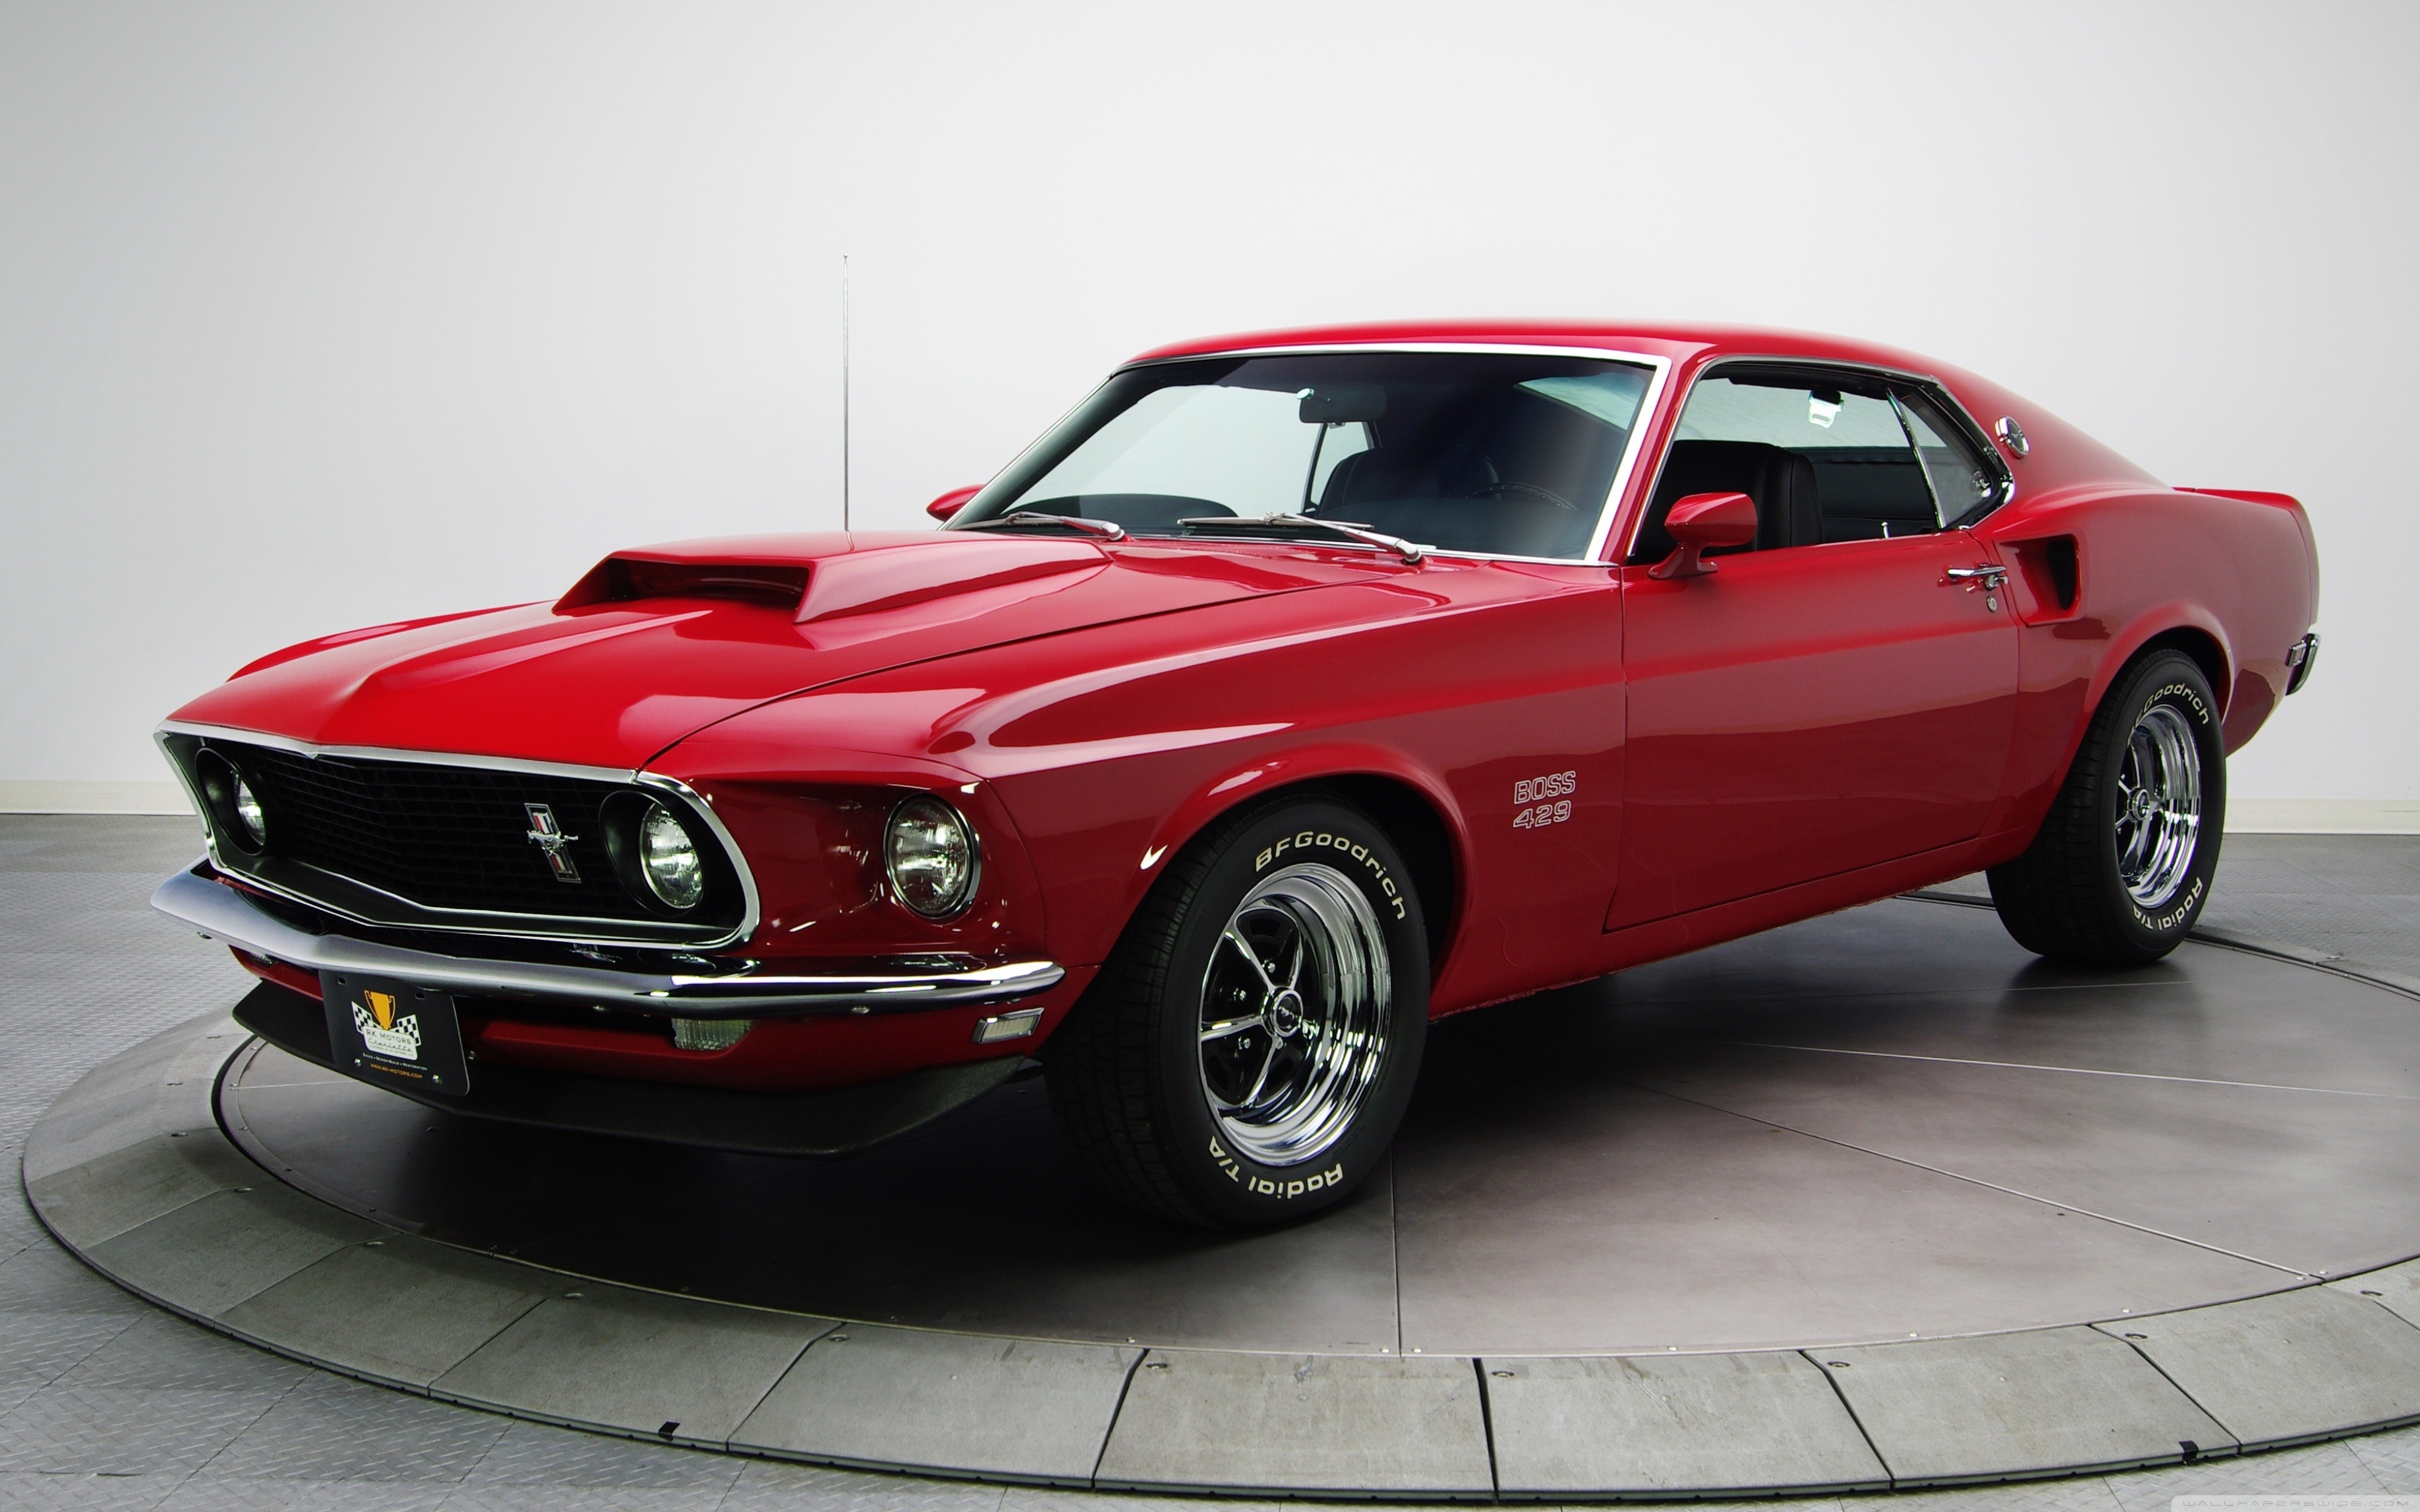 Ford Mustang 1969 Red - HD Wallpaper 